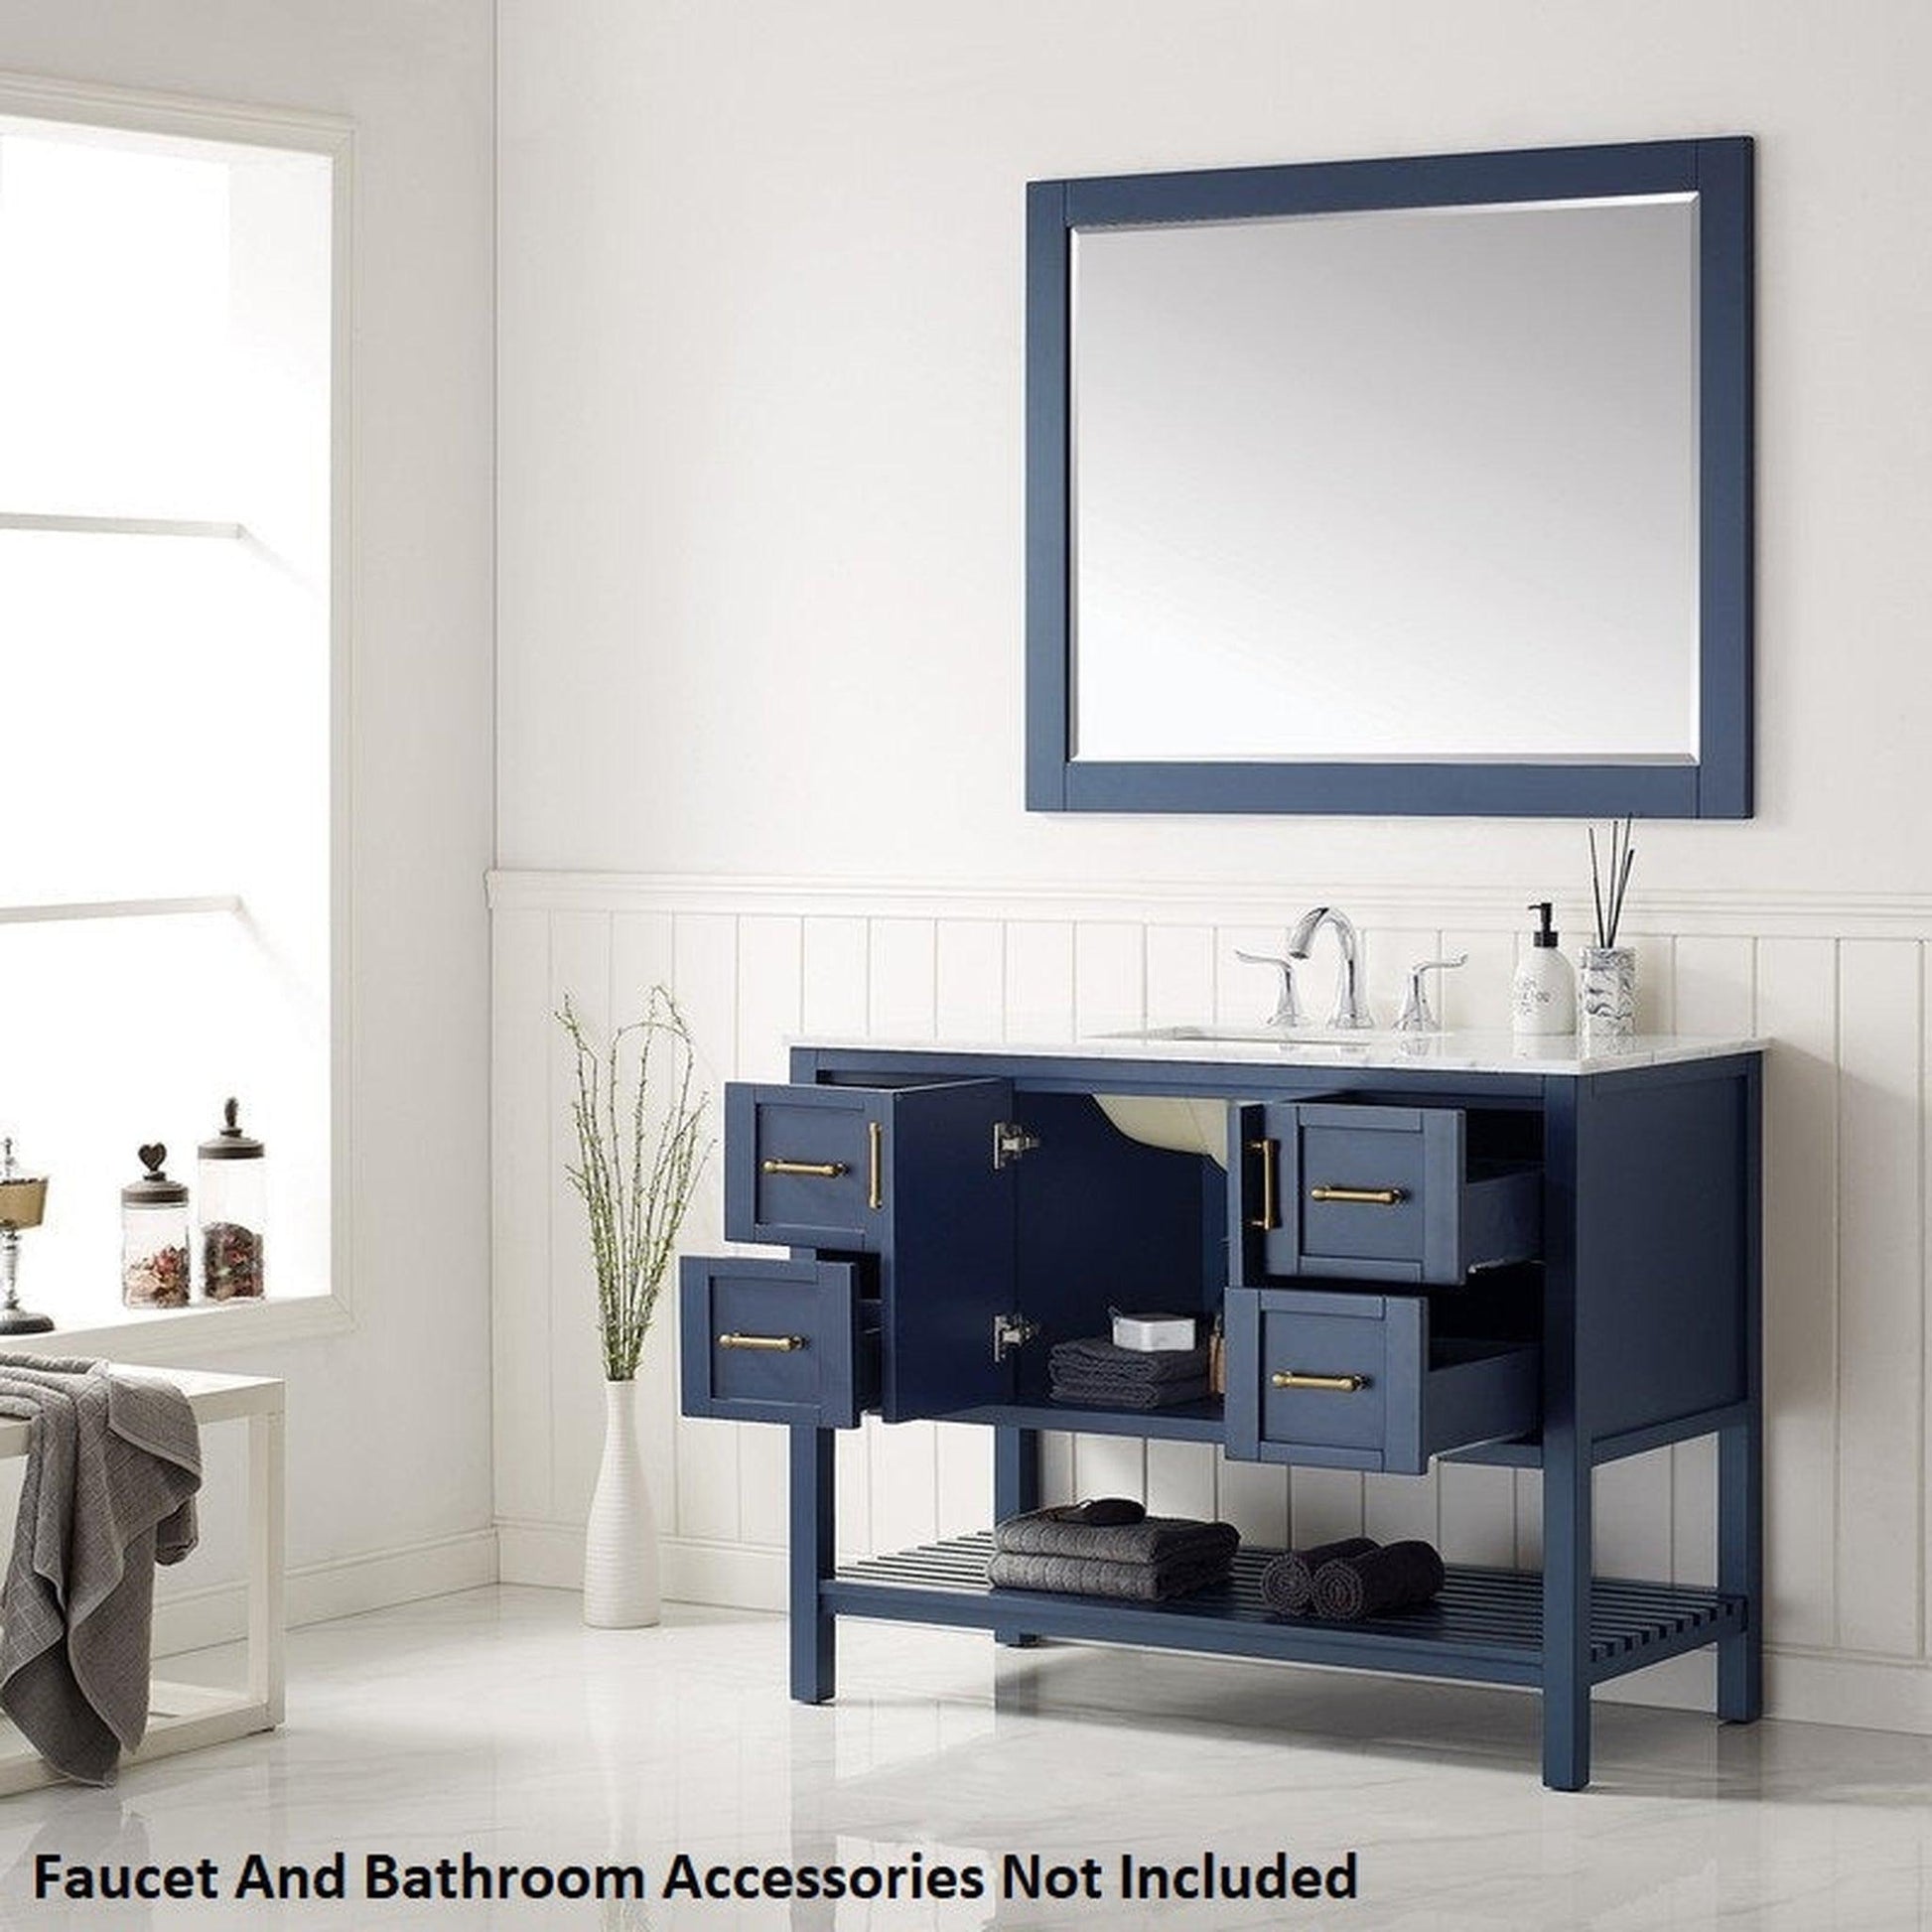 Vinnova Florence 48" Royal Blue Freestanding Single Vanity Set In White Carrara Marble Top With Undermount Ceramic Sink and Mirror